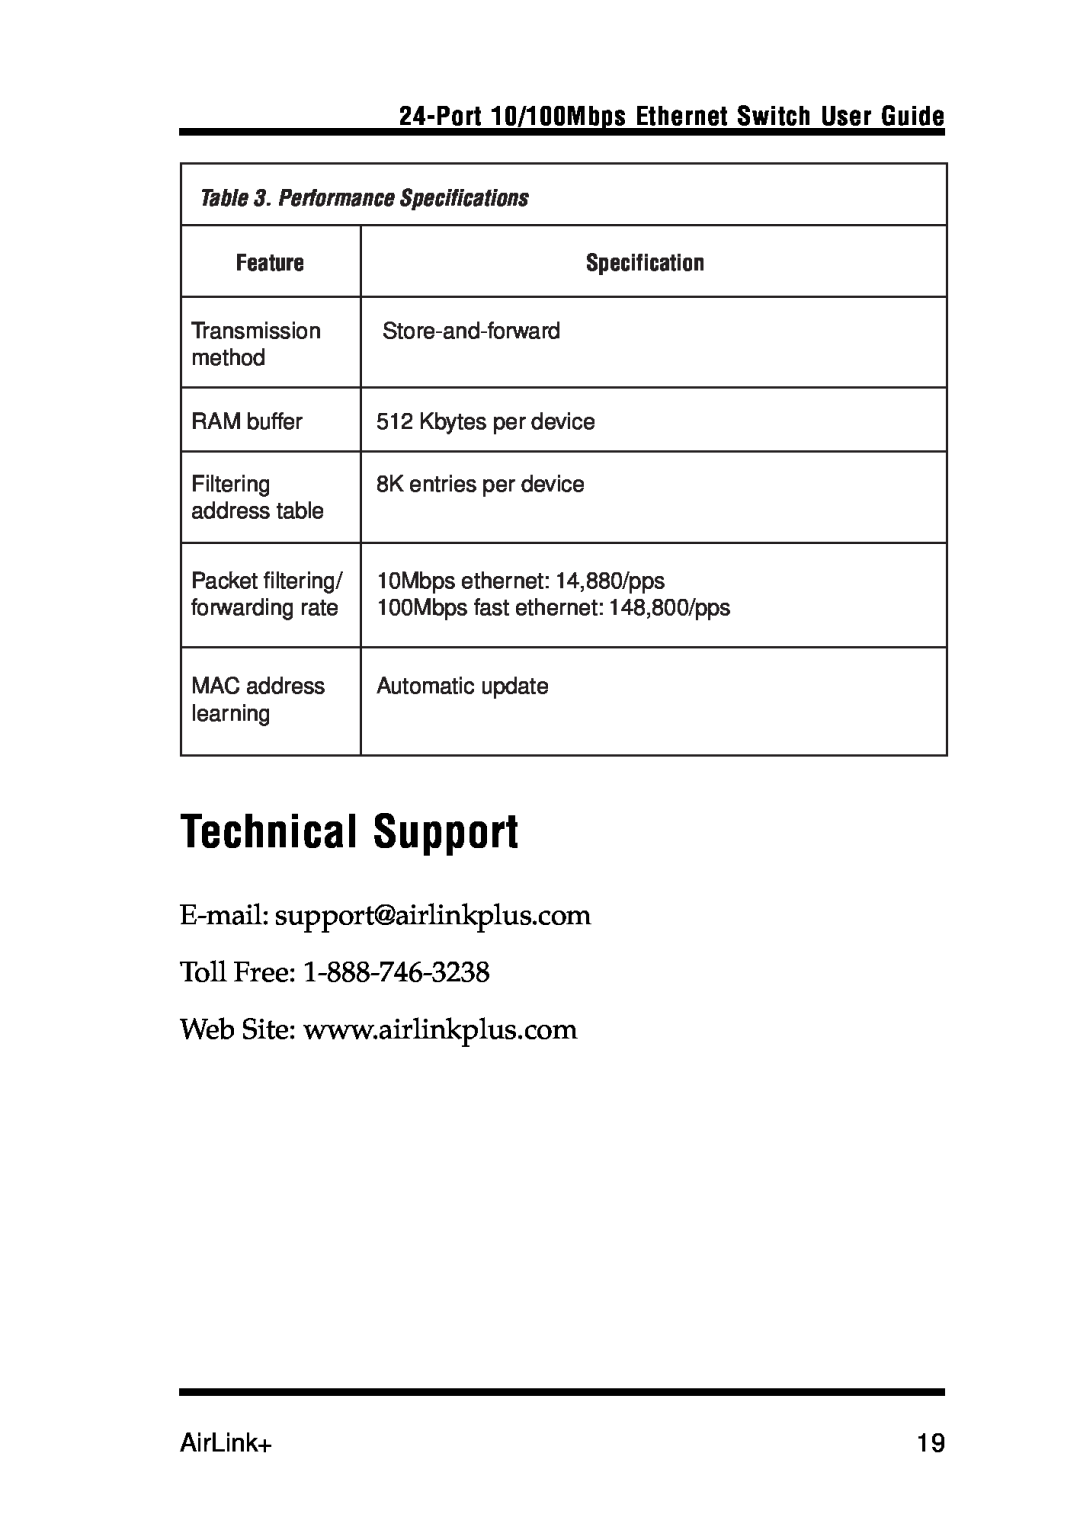 Airlink UG-ASW224-1103 Technical Support, AirLink+, Port 10/100Mbps Ethernet Switch User Guide, Performance Specifications 